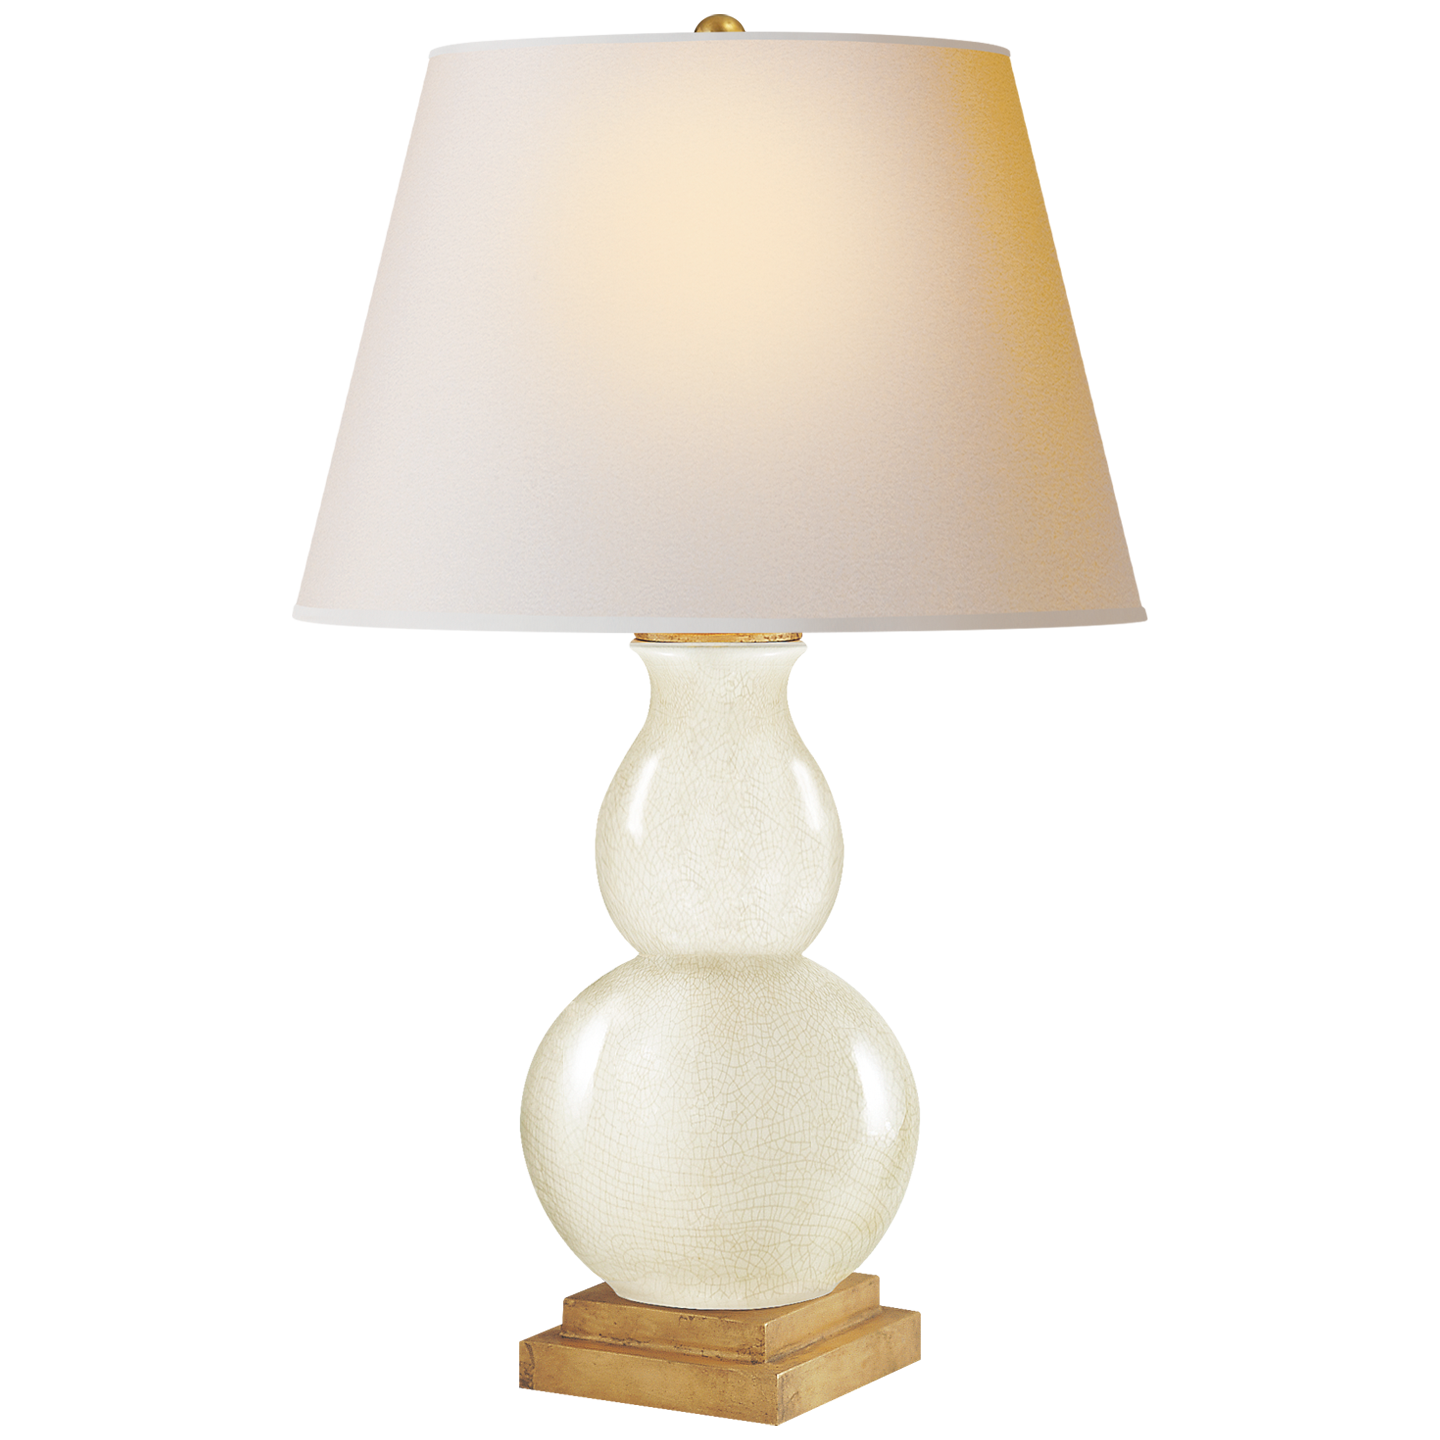 Ladda upp bild till gallerivisning, Gourd Form Small Table Lamp in Tea Stain with Natural Paper Shade
